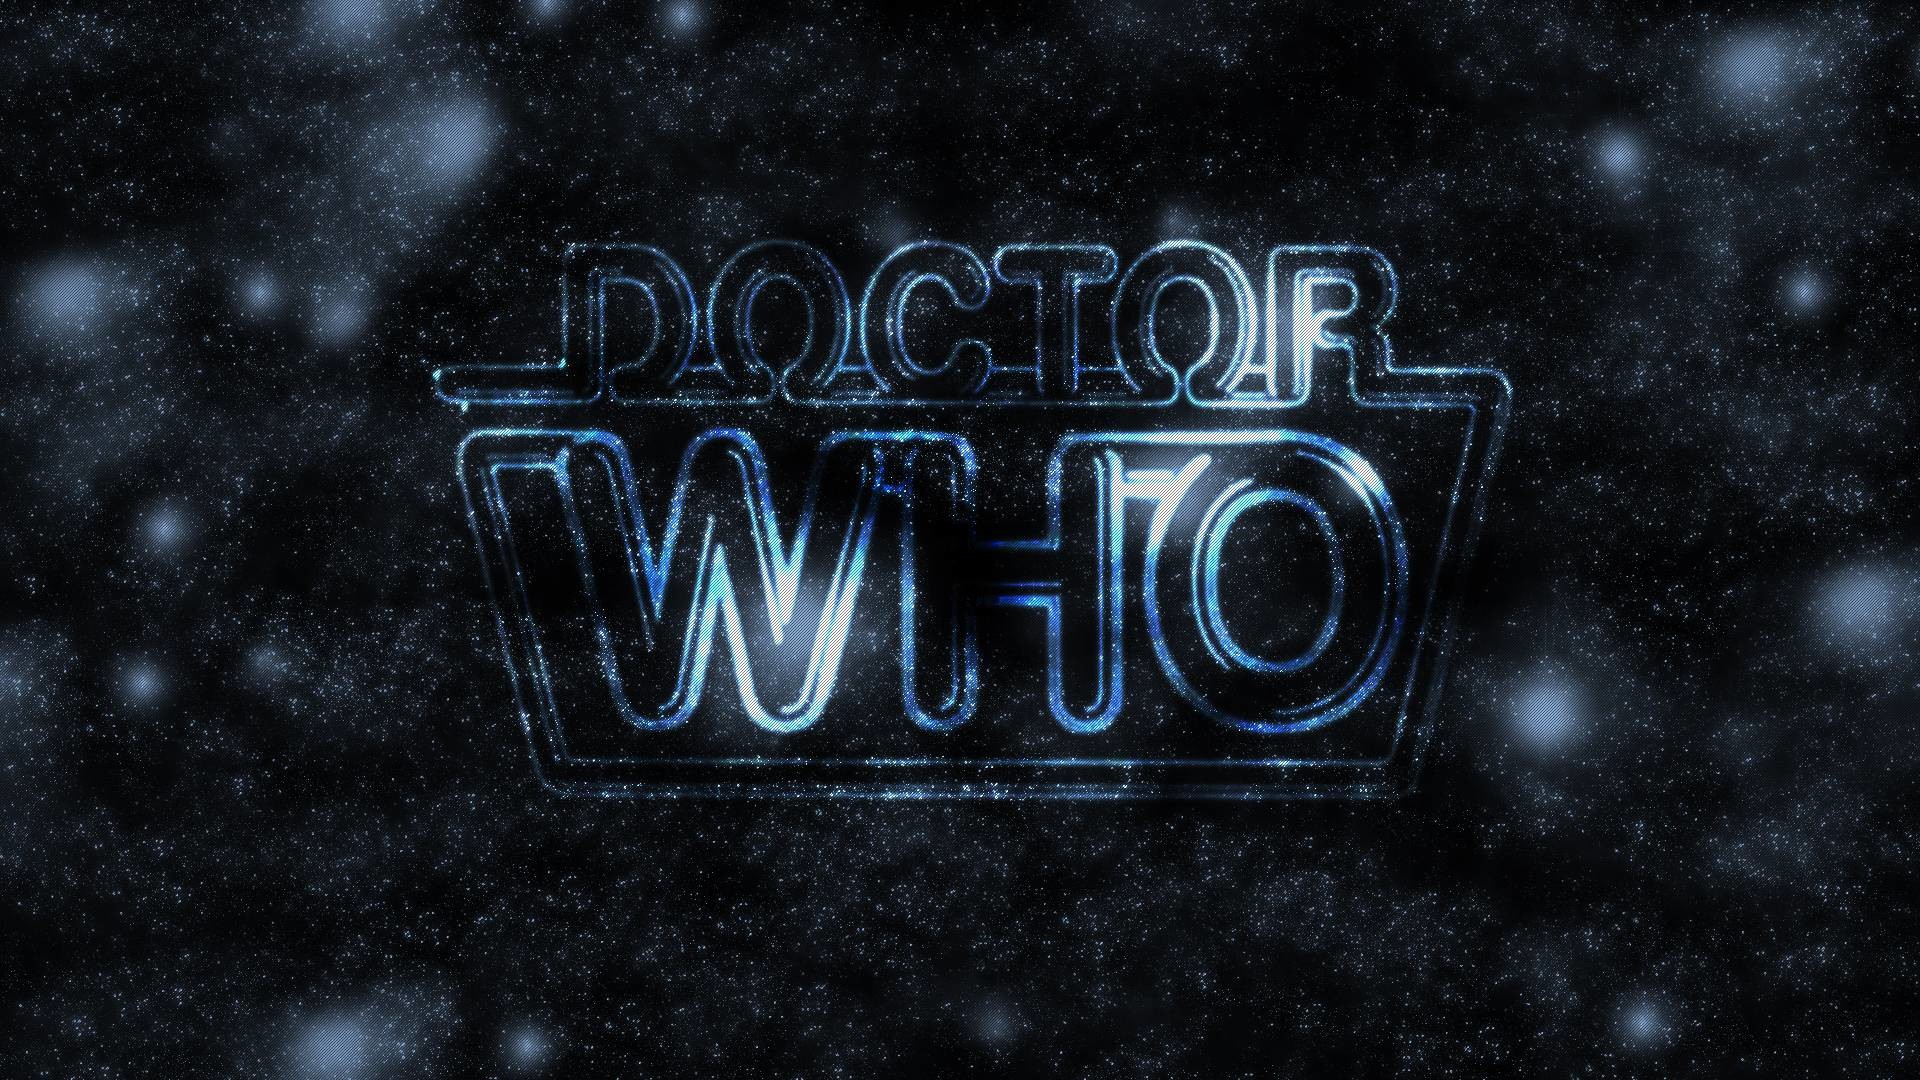 The Doctor in the Stars HD Wallpaper Download HD Wallpaper, High